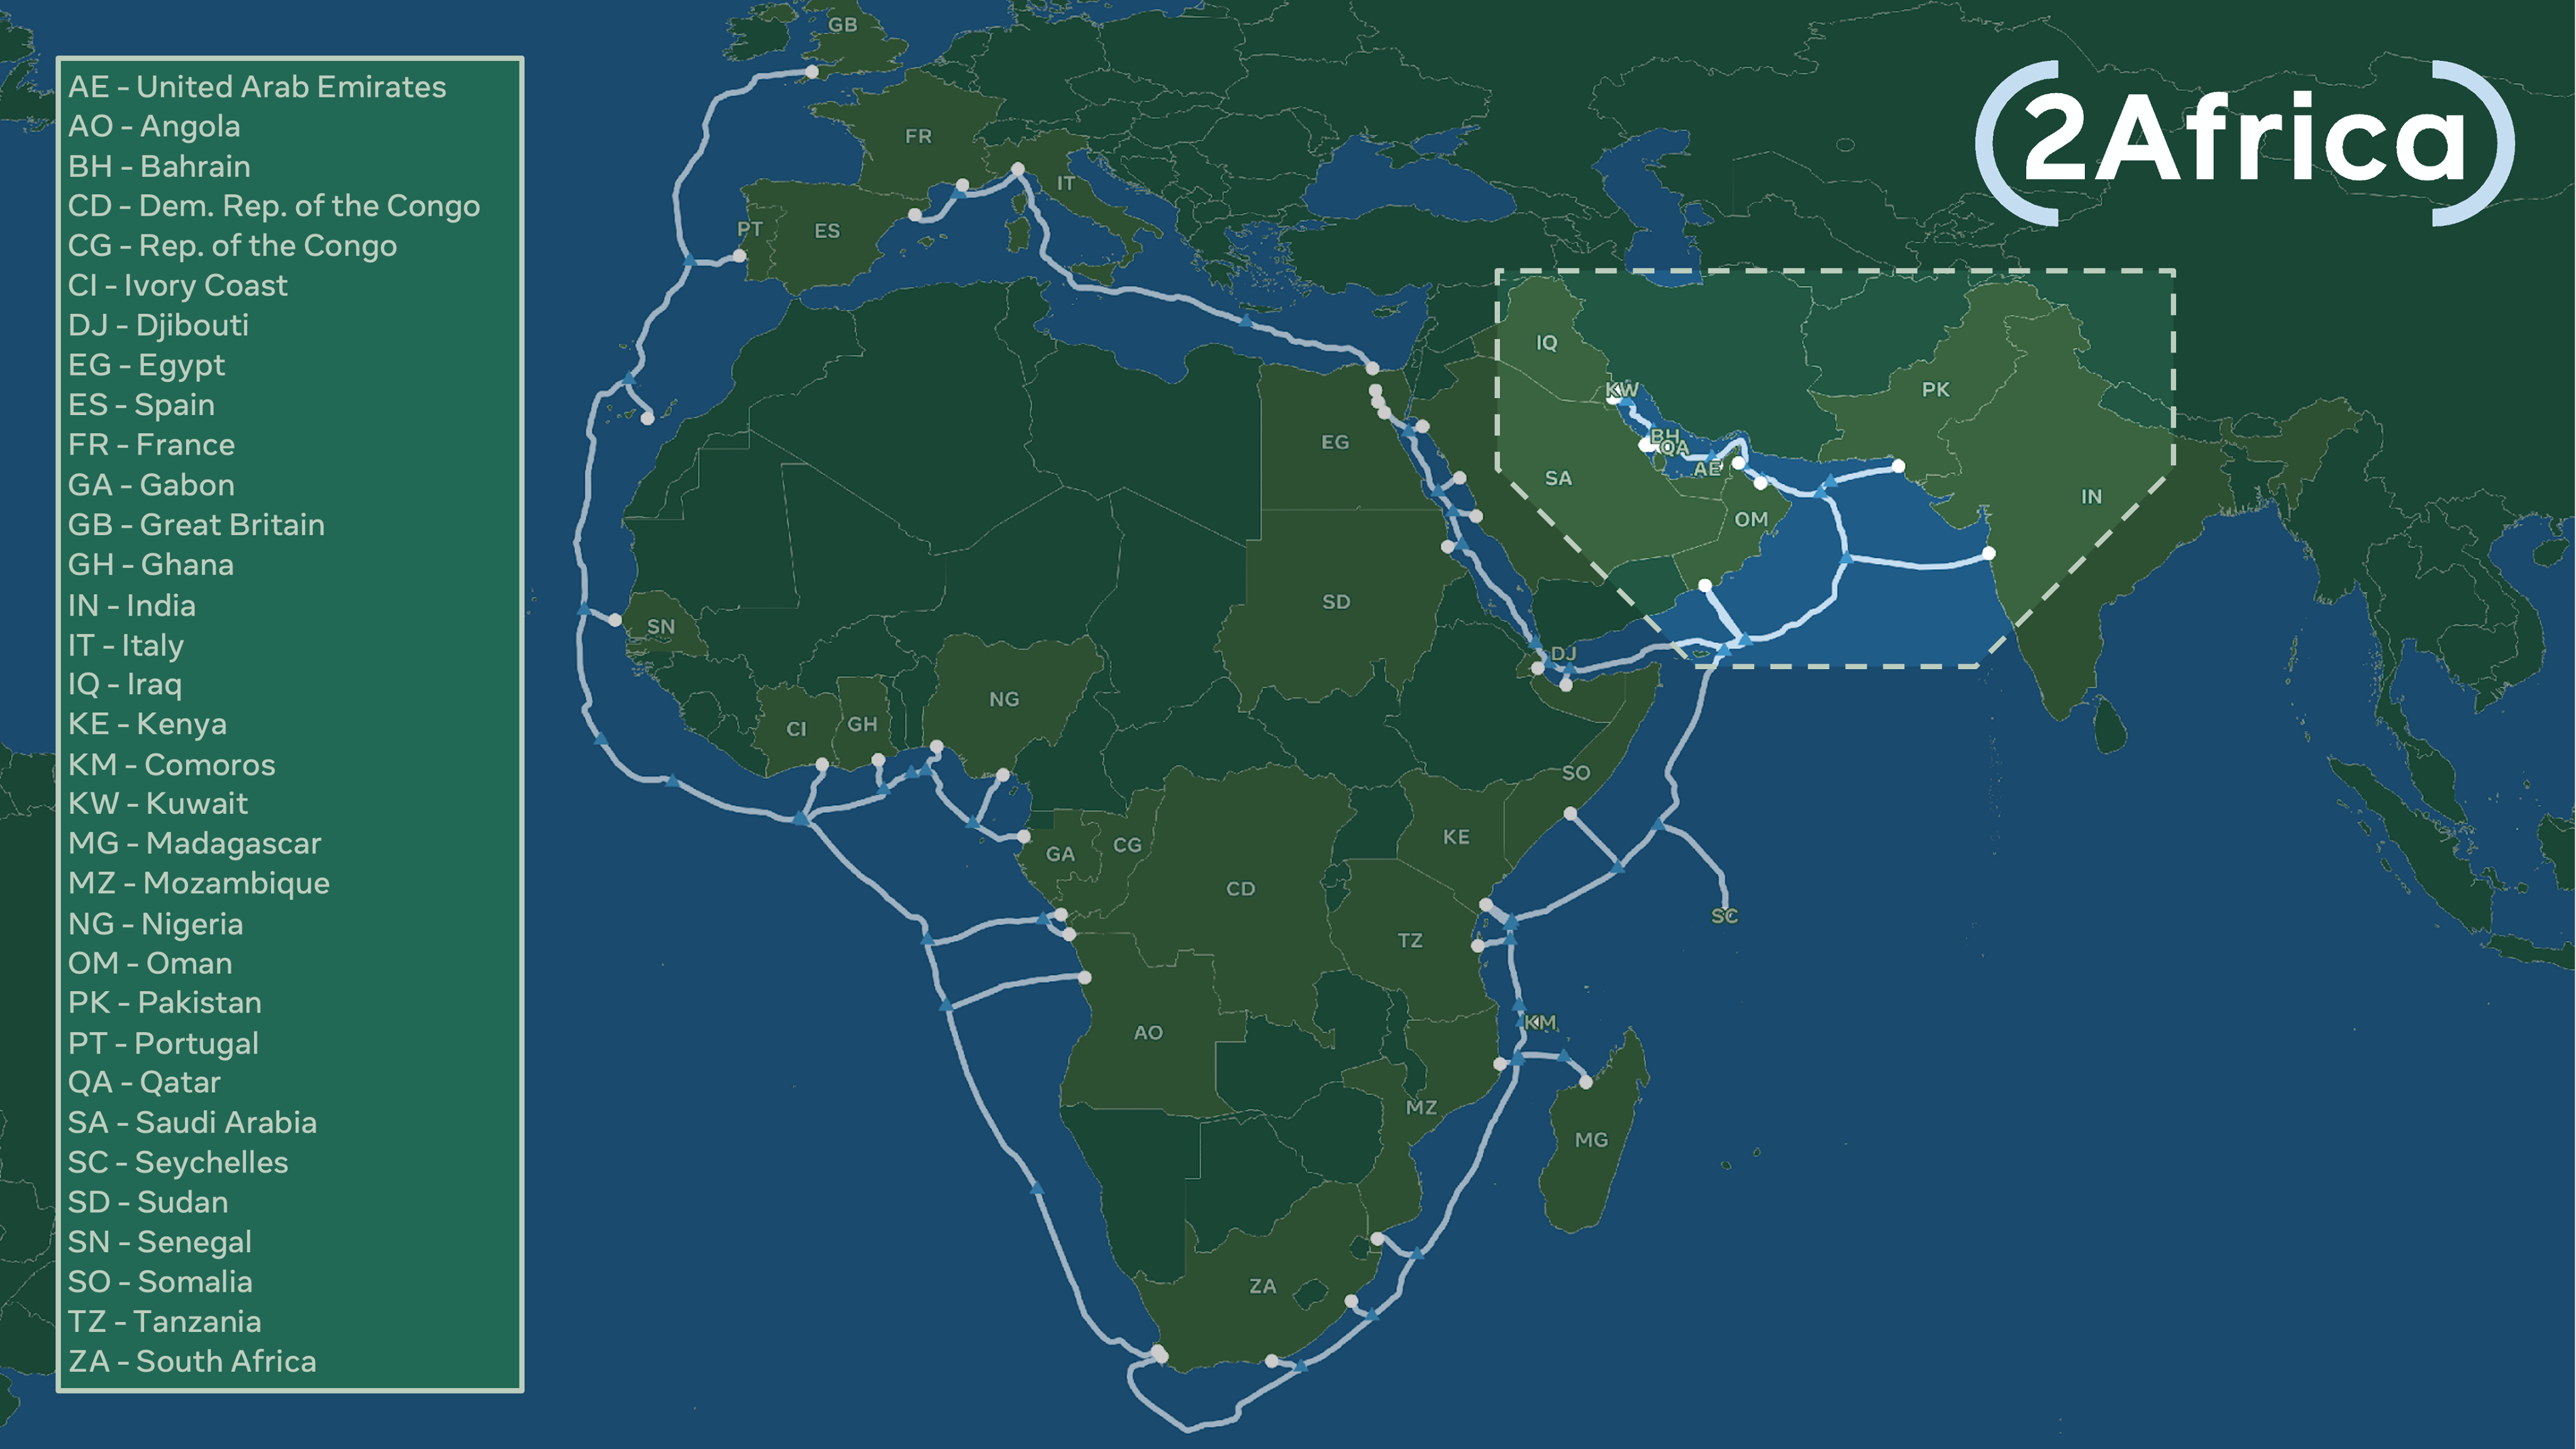 2Africa Extended to the Arabian Gulf, India, and Pakistan - Now the Longest Subsea Cable System in the World